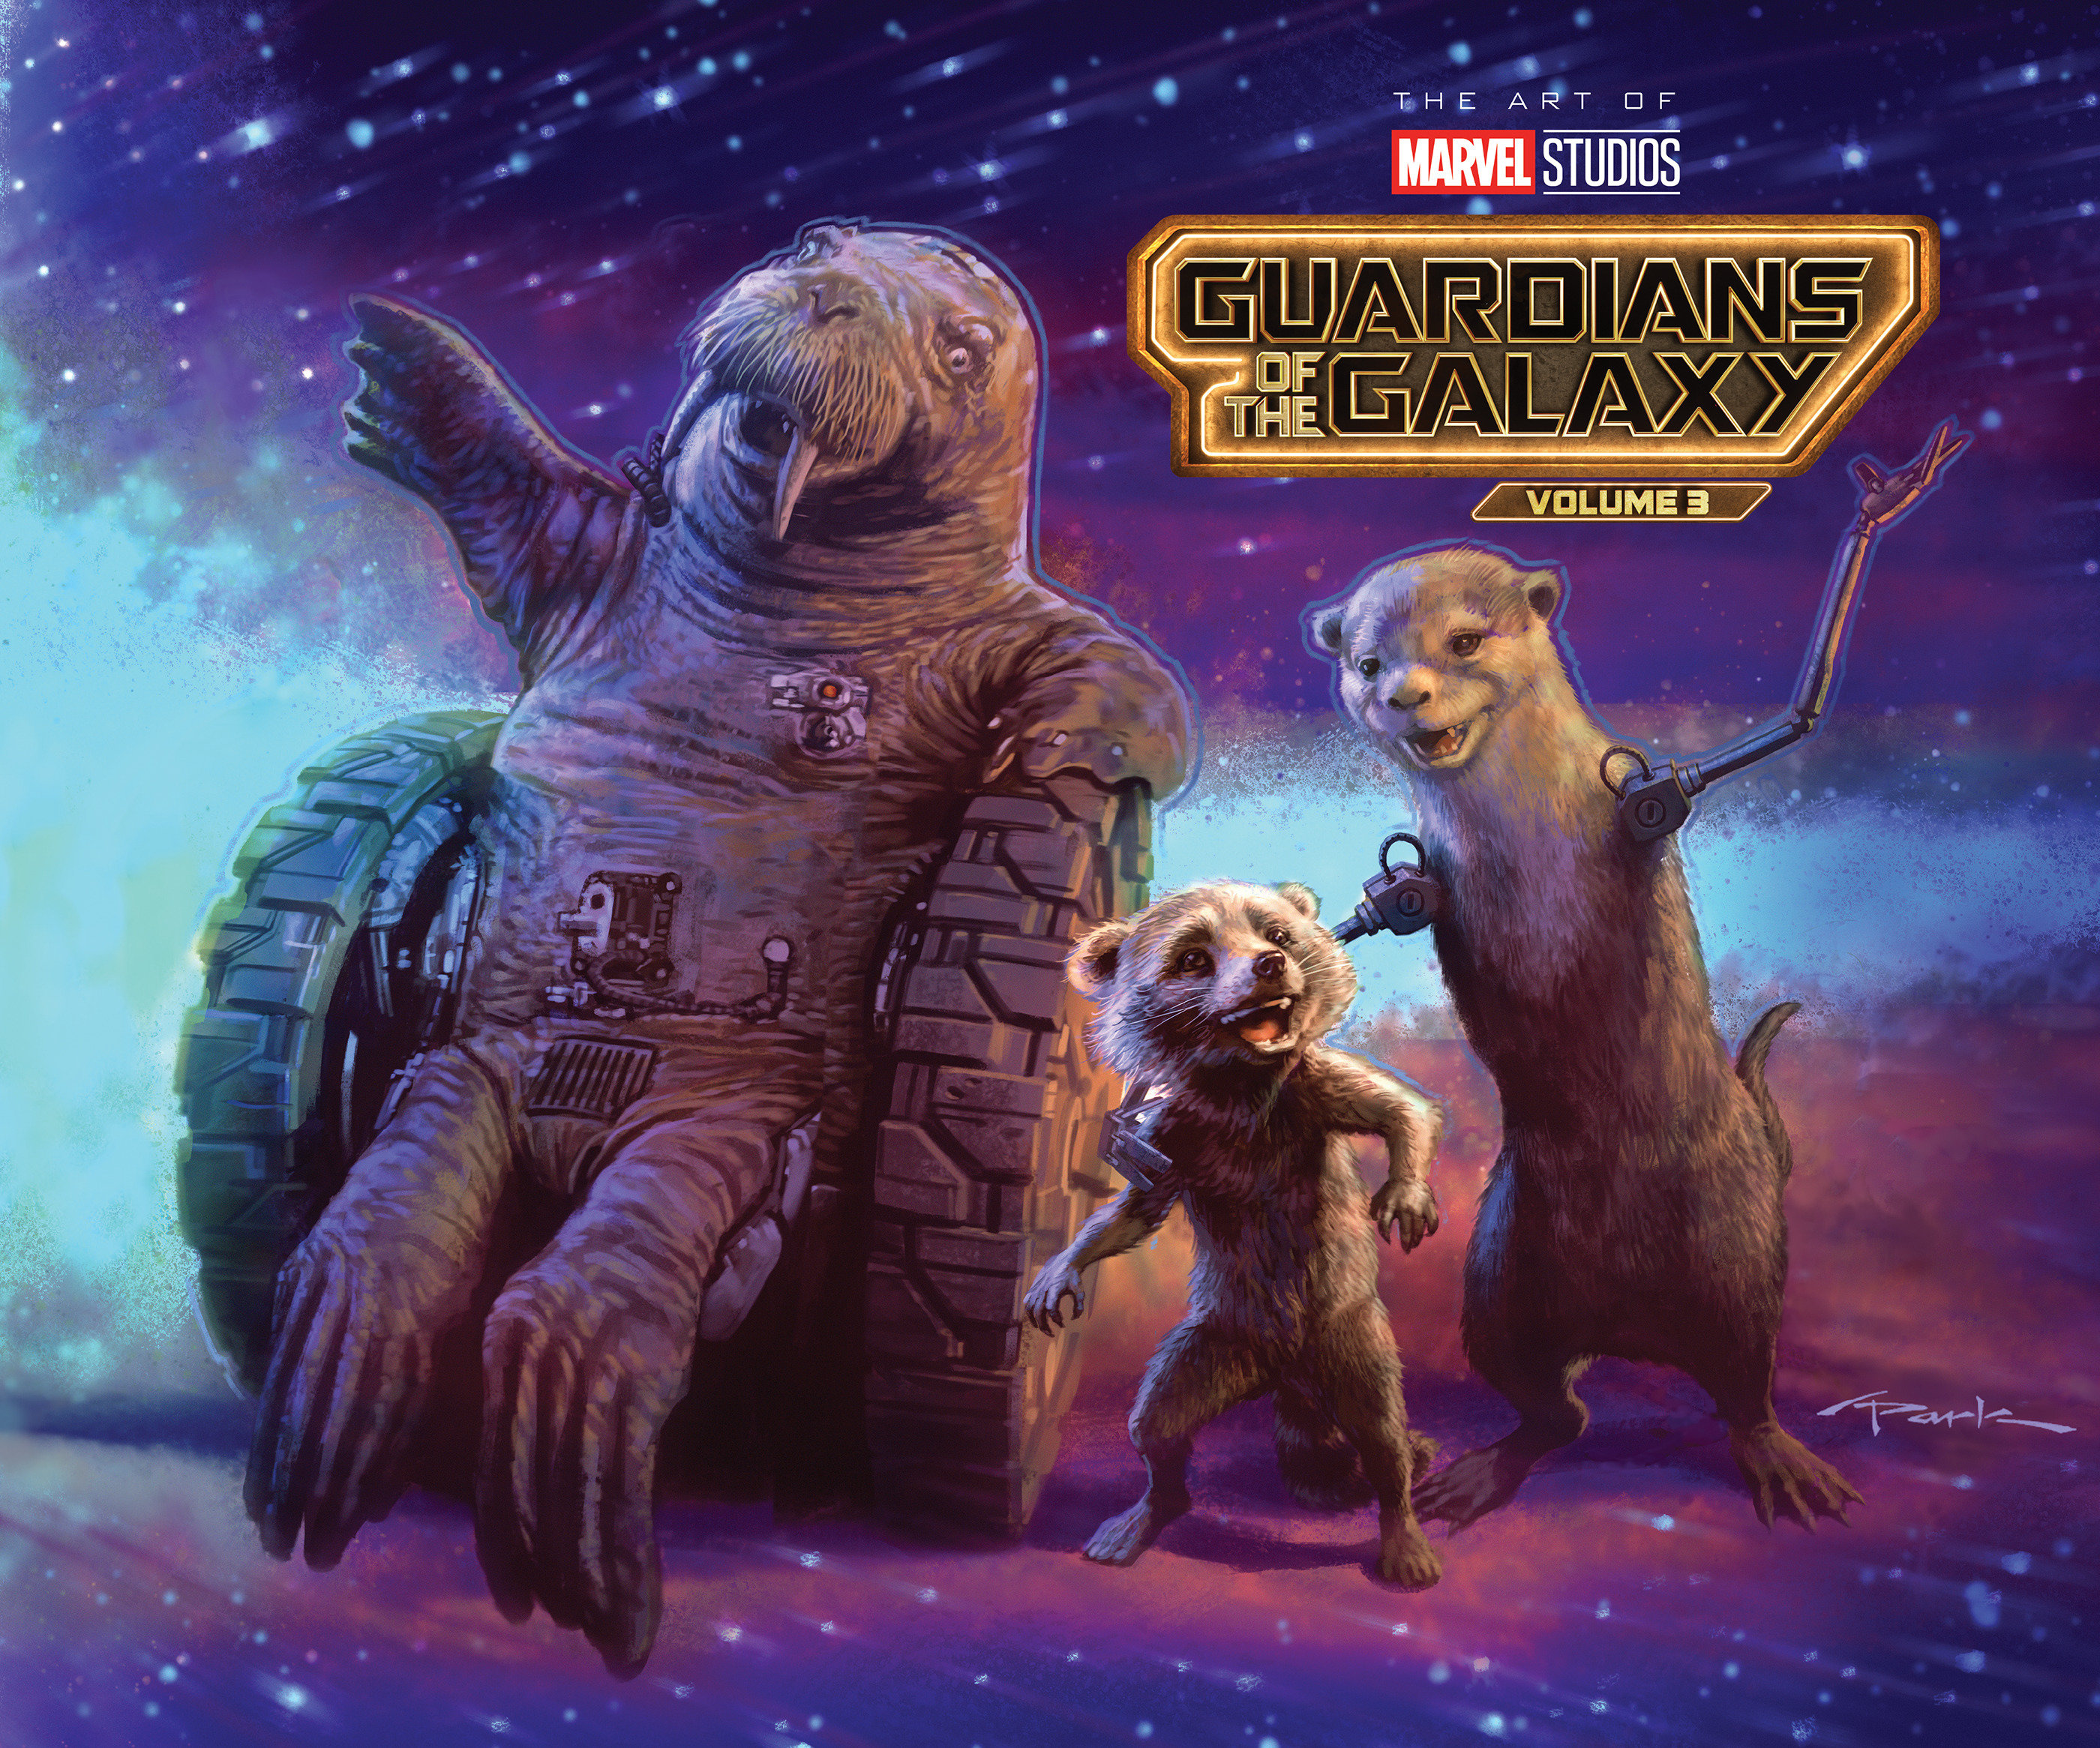 Marvel Studios' Guardians of the Galaxy Volume 3: The Art of the Movie